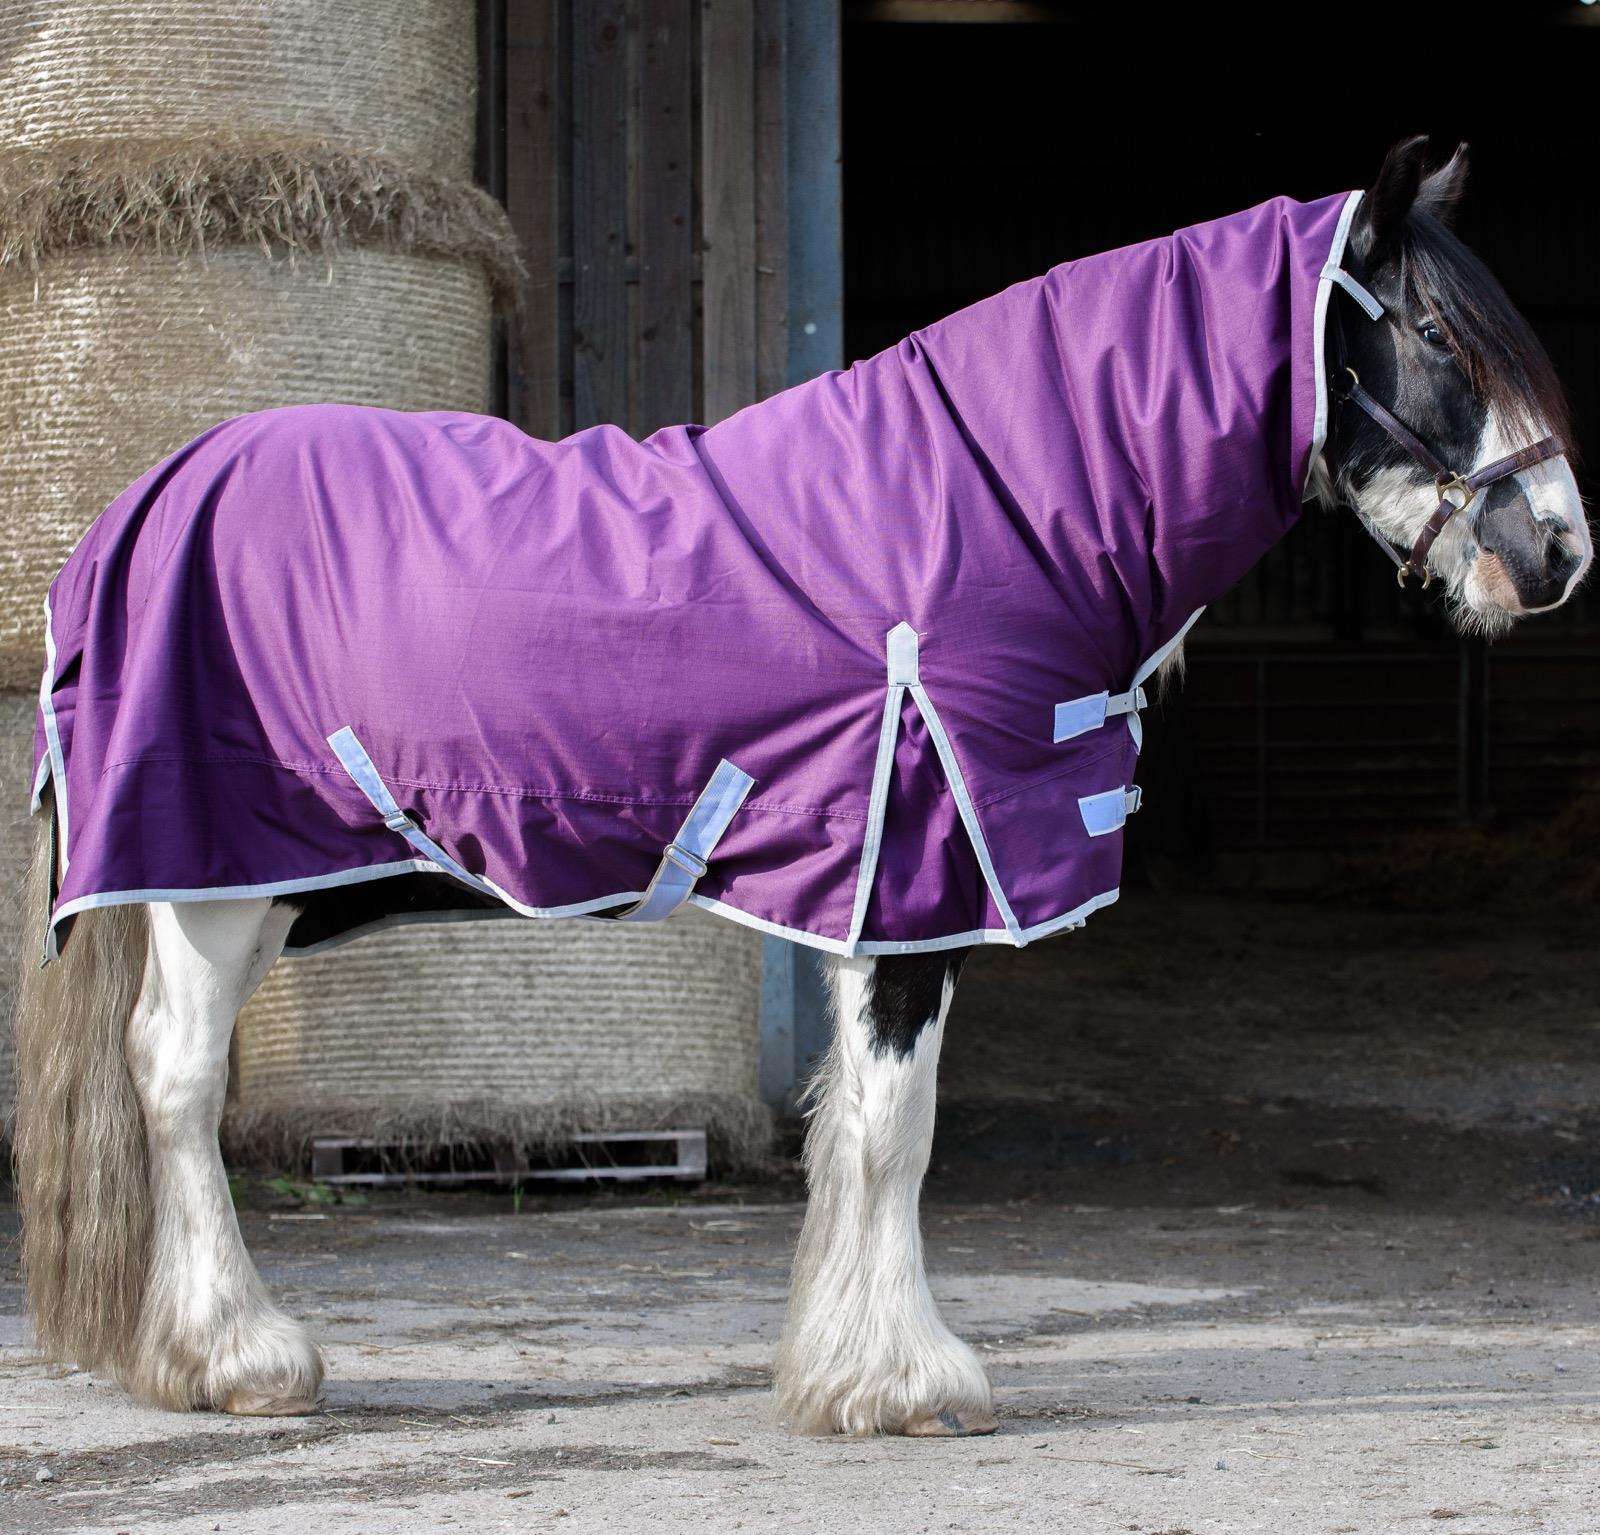 600D Outdoor Mediumweight Turnout 50G Fill COMBO Thermo Horse Rug Plum 5'6-6'9